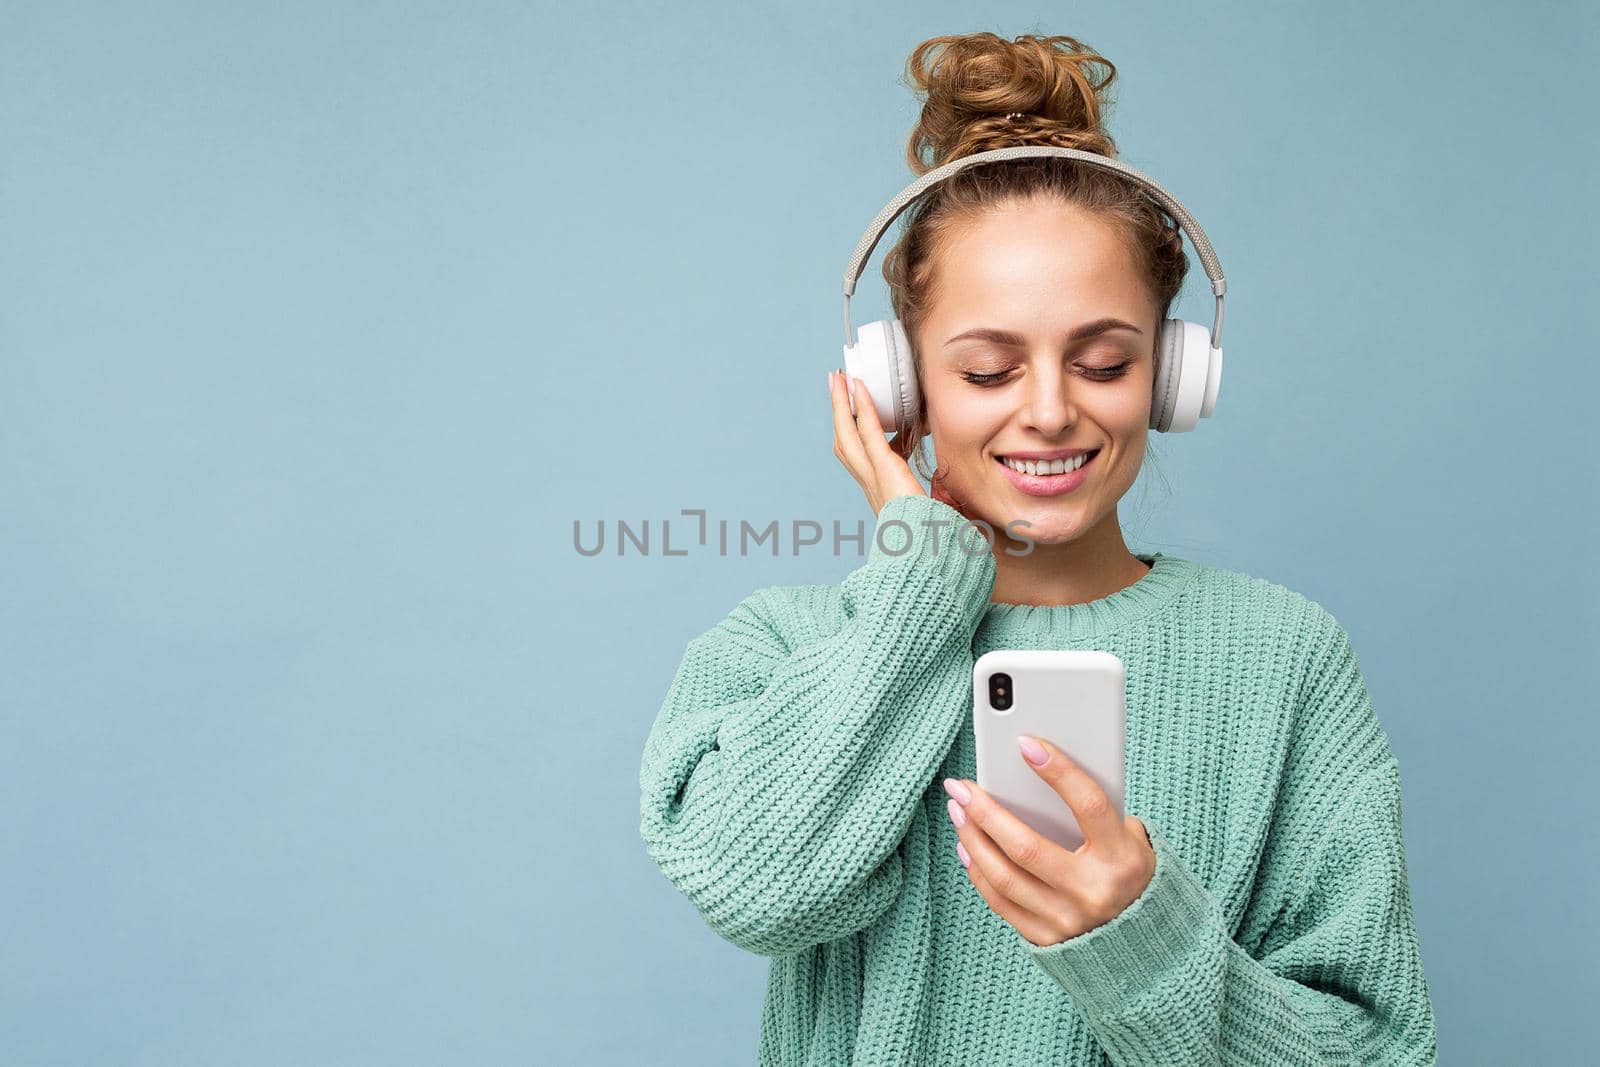 Photo of beautiful joyful smiling young woman wearing stylish casual clothes isolated over background wall holding and using mobile phone wearing white bluetooth headphones listening to music and having fun.